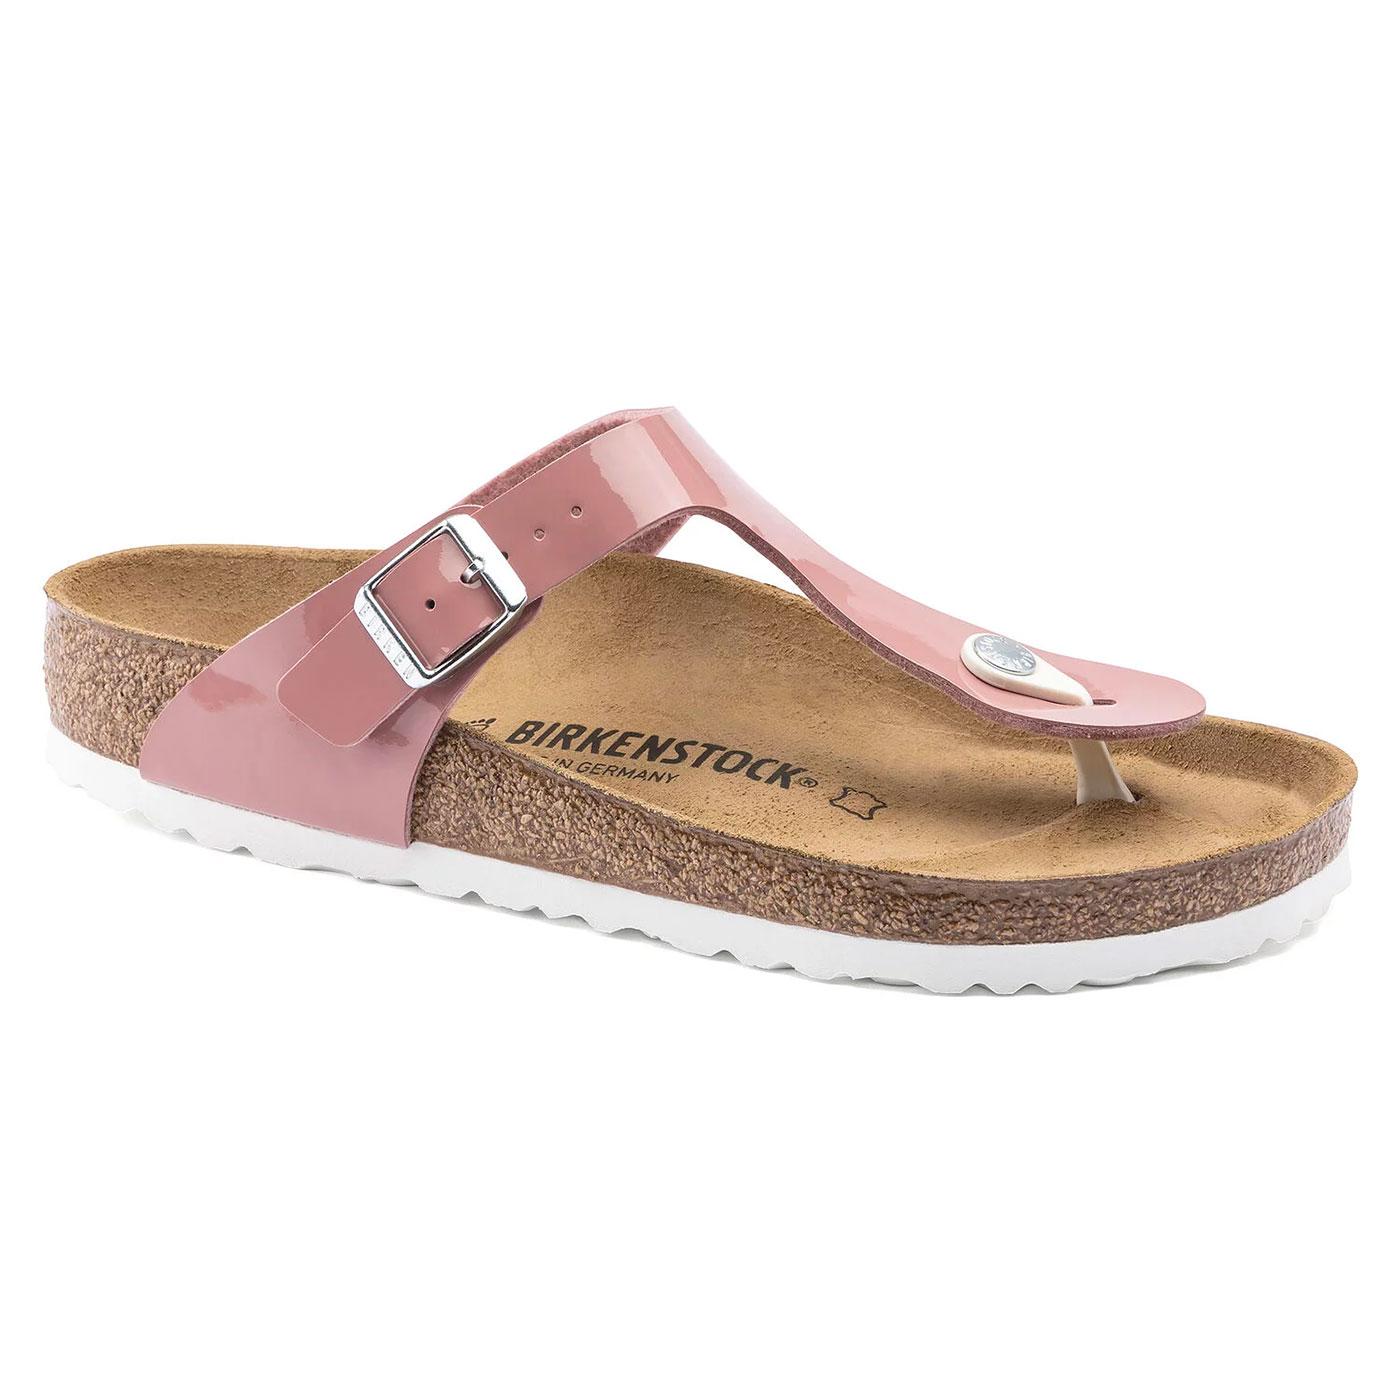 BIRKENSTOCK Gizeh BF Patent Thong Sandals in Old Rose